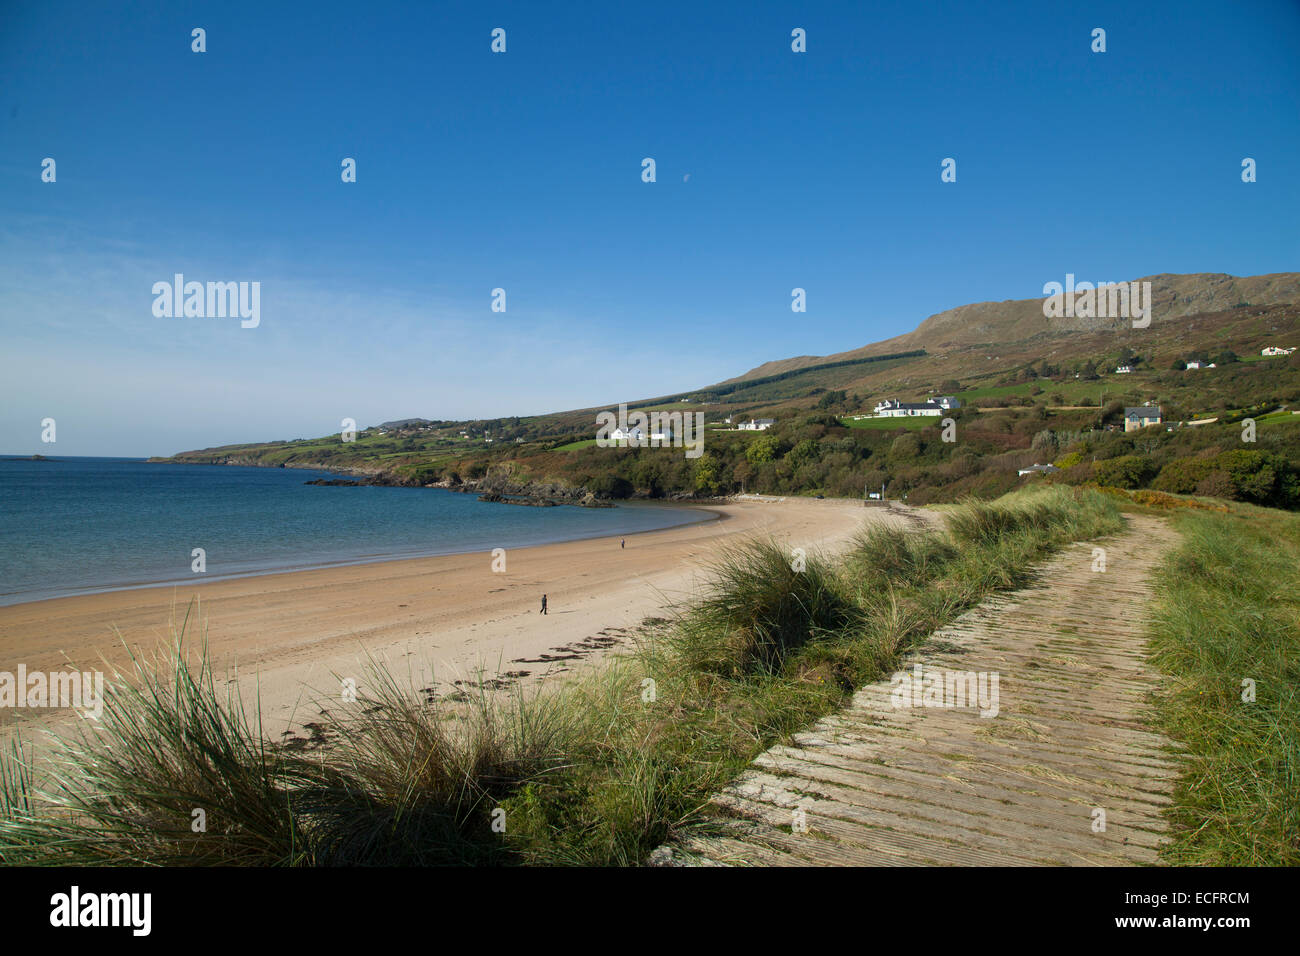 High vantage point picture of Fintra beach in Co. Donegal from a board walk on top of the dunes, on a sunny day Stock Photo